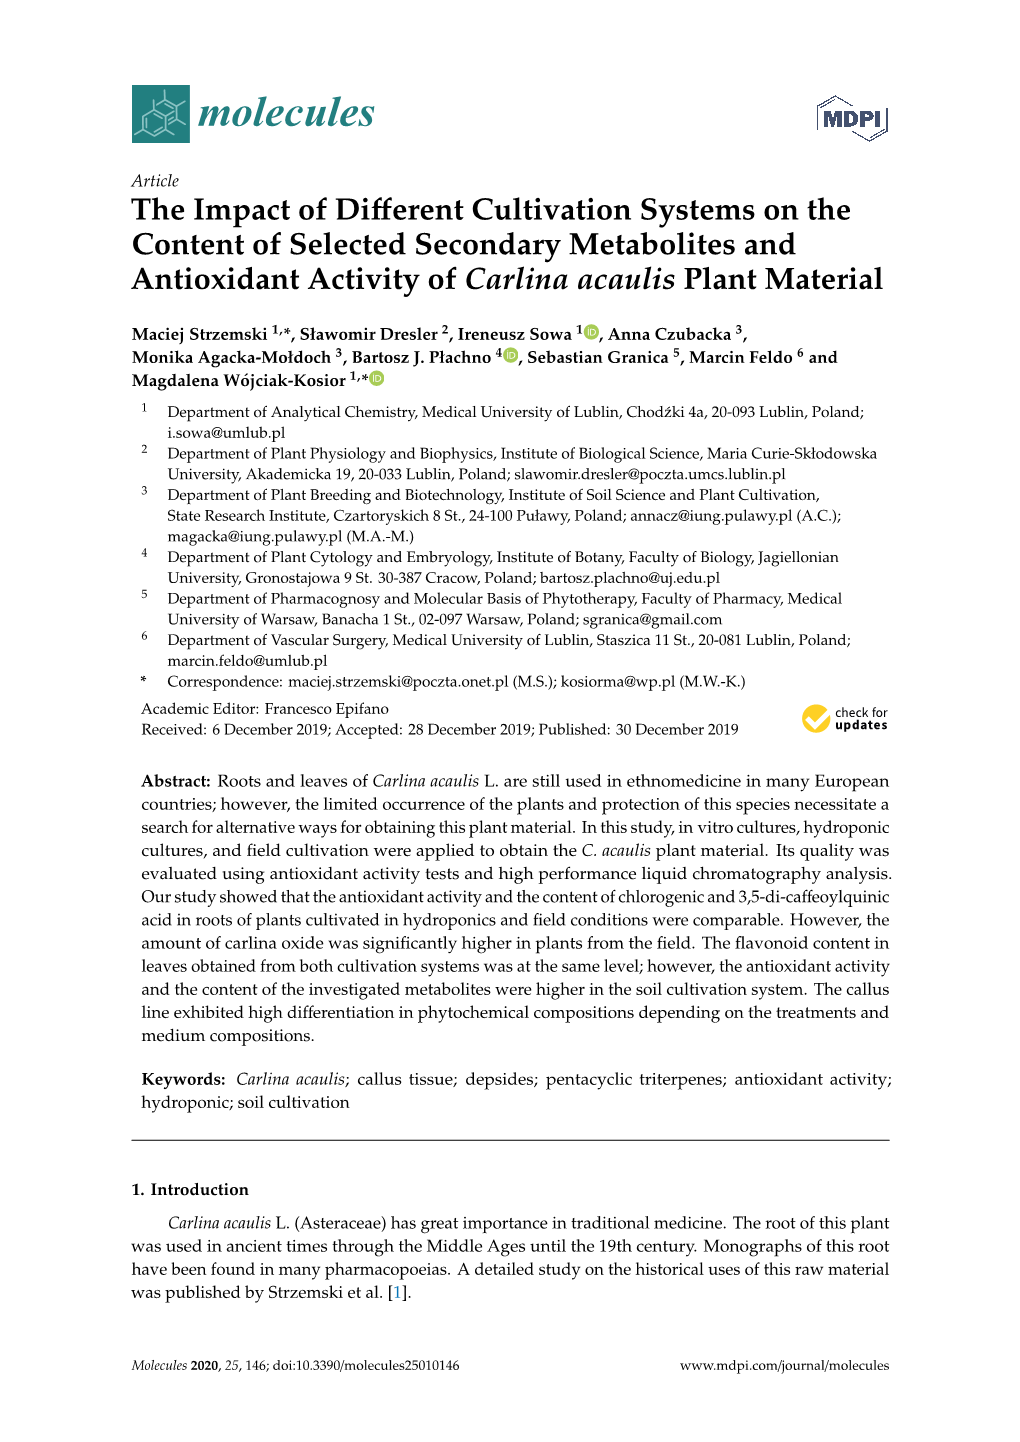 The Impact of Different Cultivation Systems on the Content of Selected Secondary Metabolites and Antioxidant Activity of Carlina Acaulis Plant Material